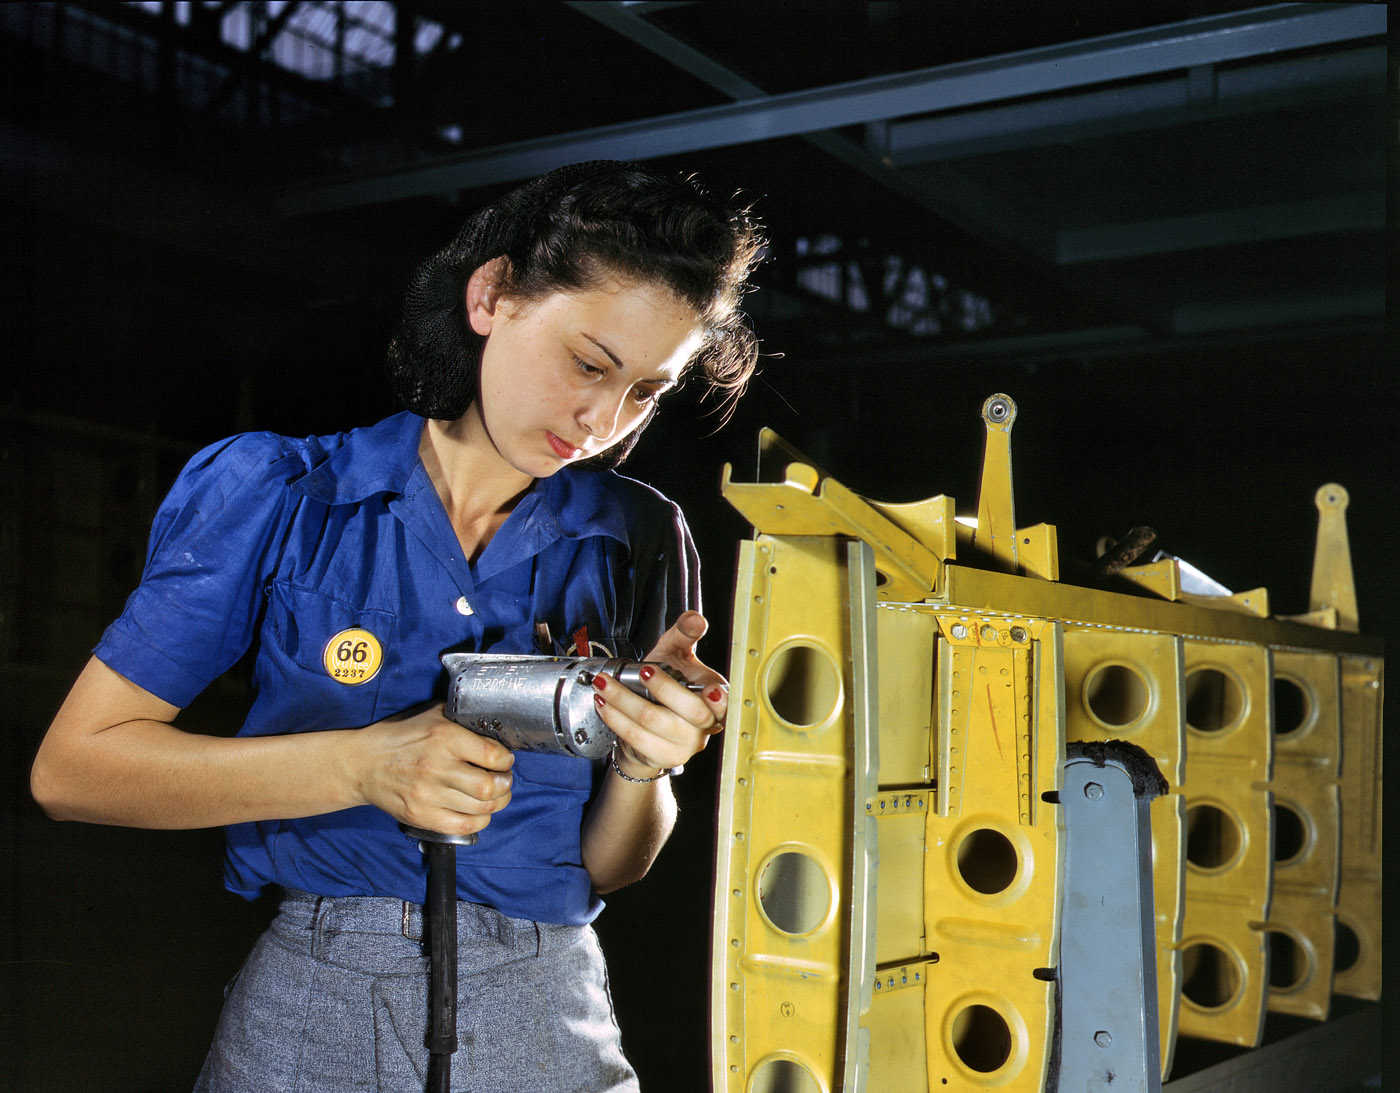 February 1943. Working on the horizontal stabilizer of a "Vengeance" dive bomber at the Consolidated-Vultee plant in Nashville. View full size. 4x5 Kodachrome transparency by Alfred Palmer for the Office of War Information.